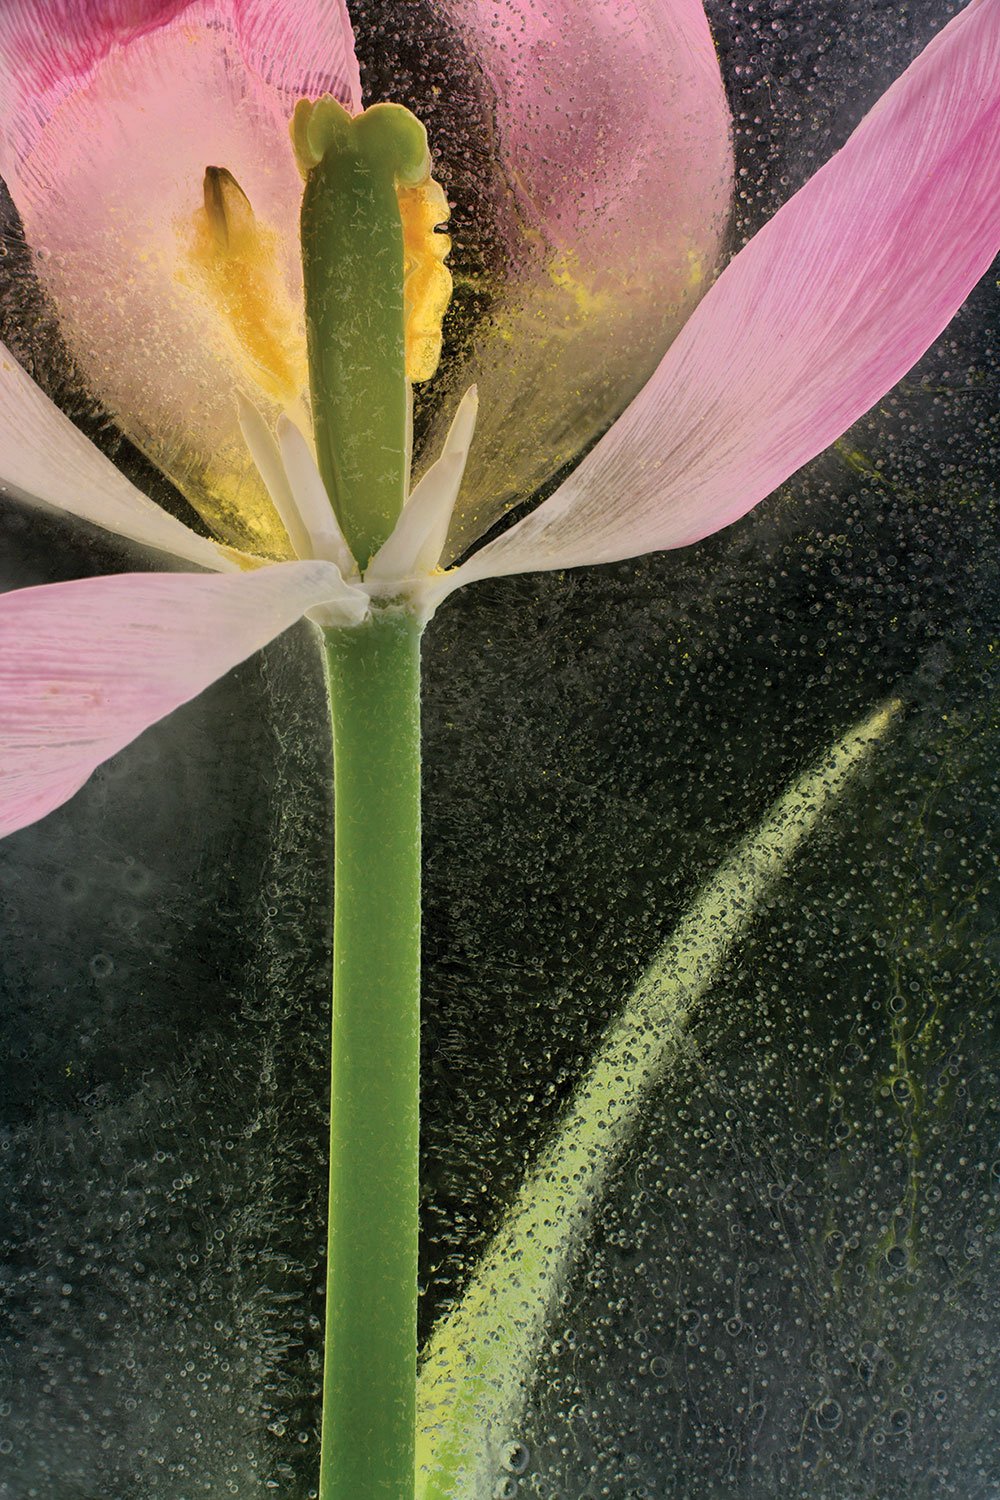 Tulip in photographed in ice, inverted luminosity